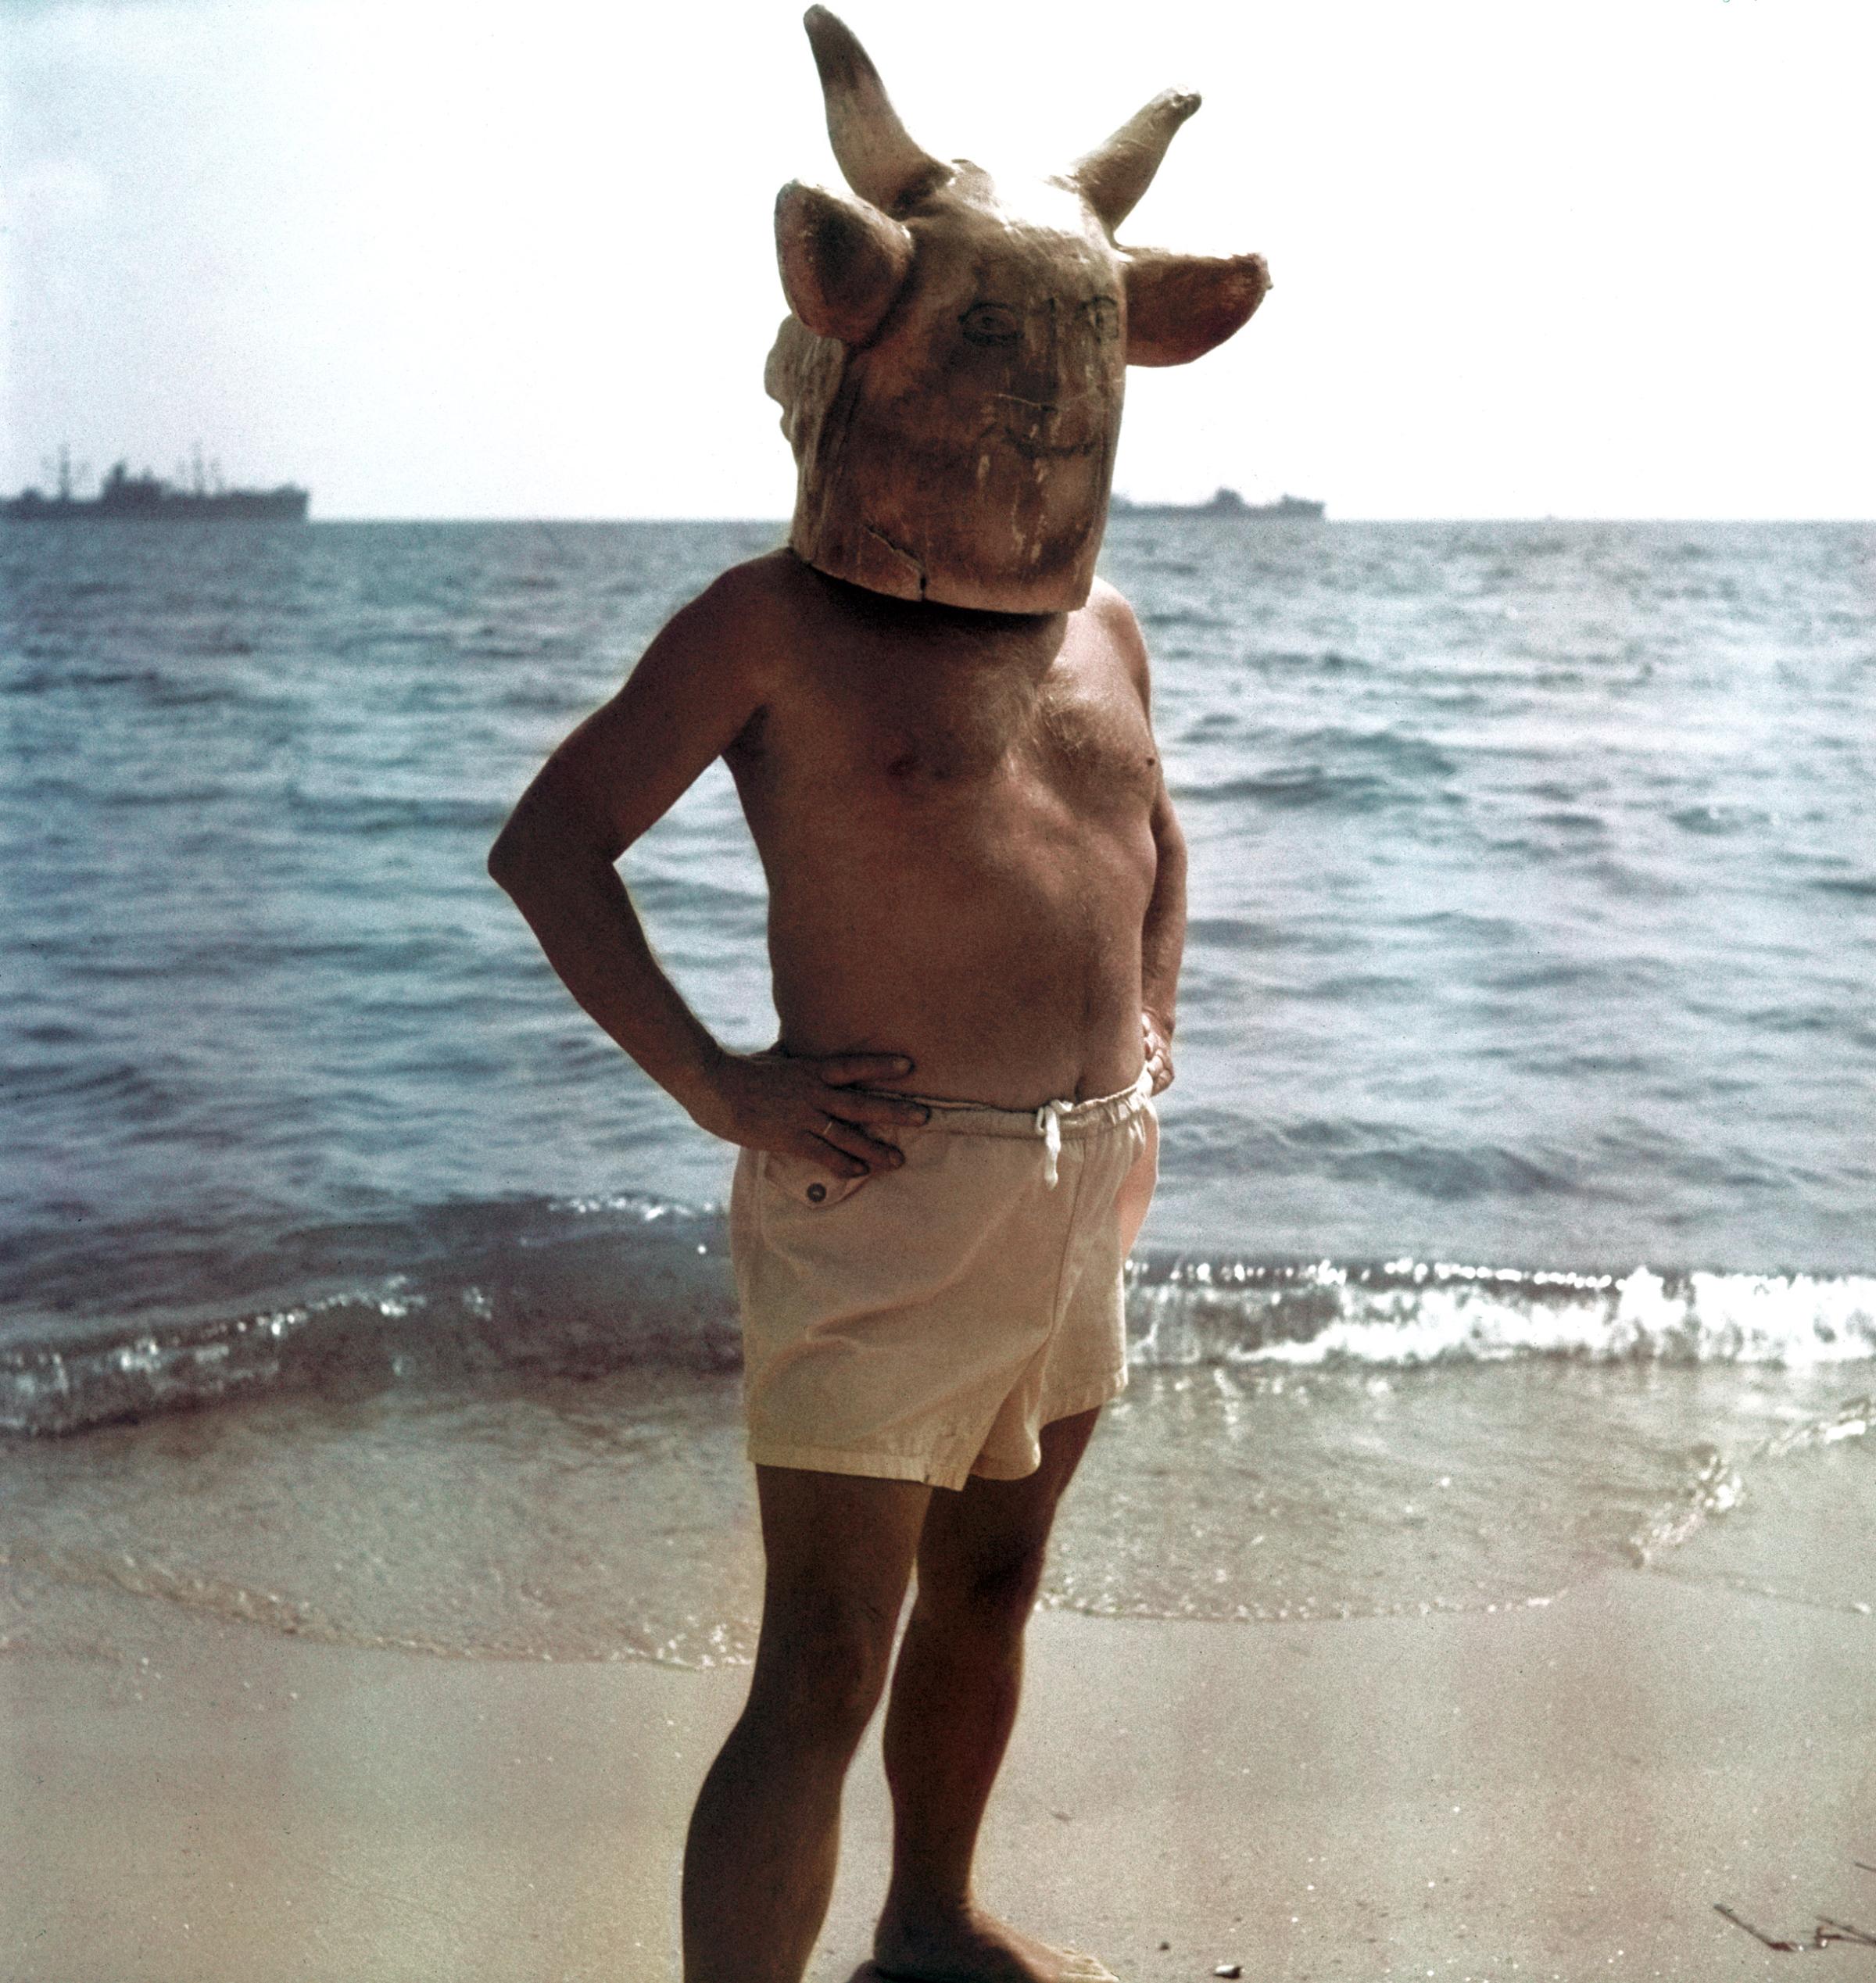 Pablo Picasso wearing a minotaur head mask on the beach at Golfe Juan near Vallauris.